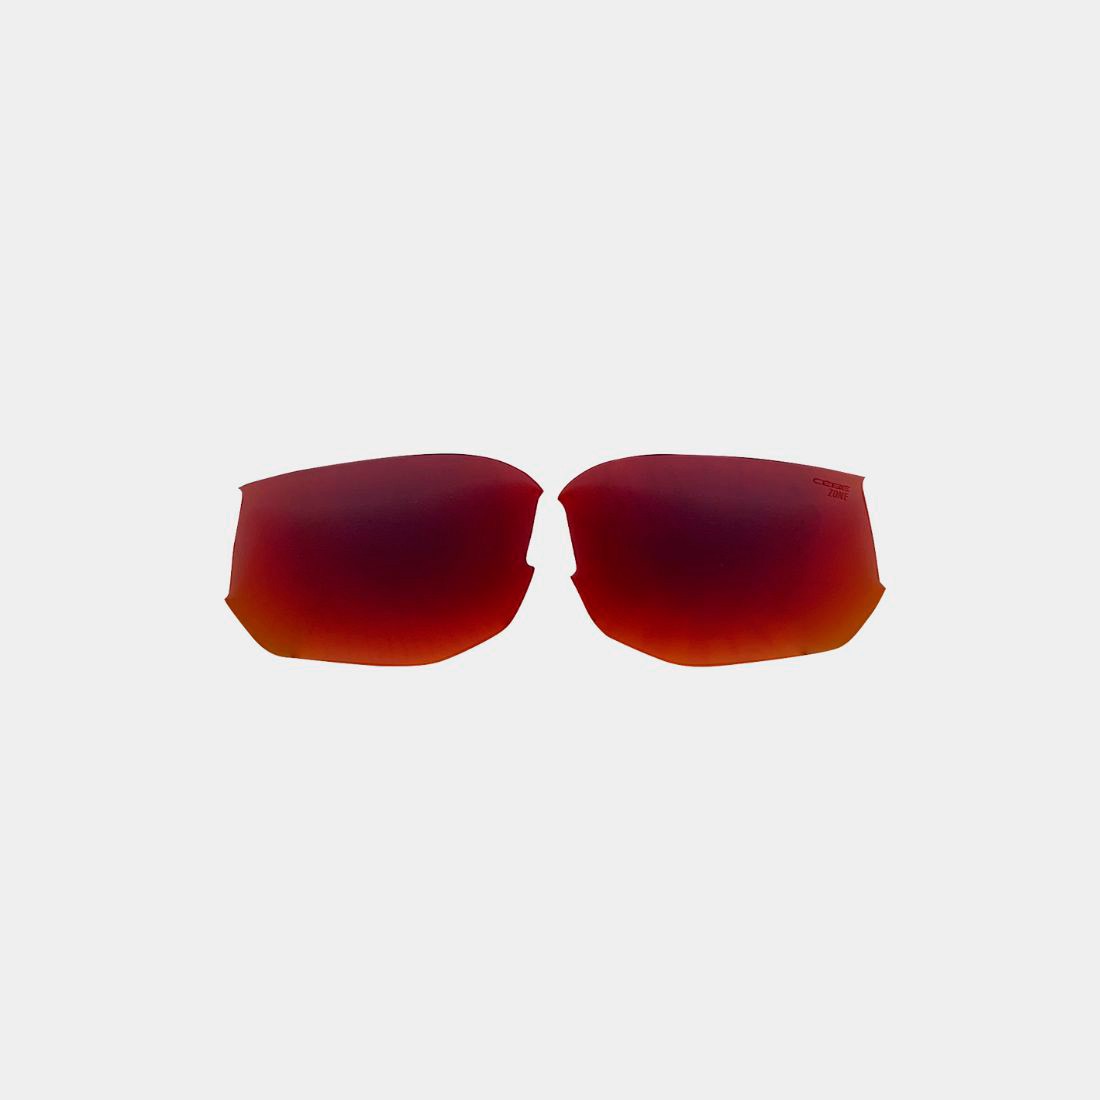 S'TRACK L 2.0 - REPLACEMENT LENSES